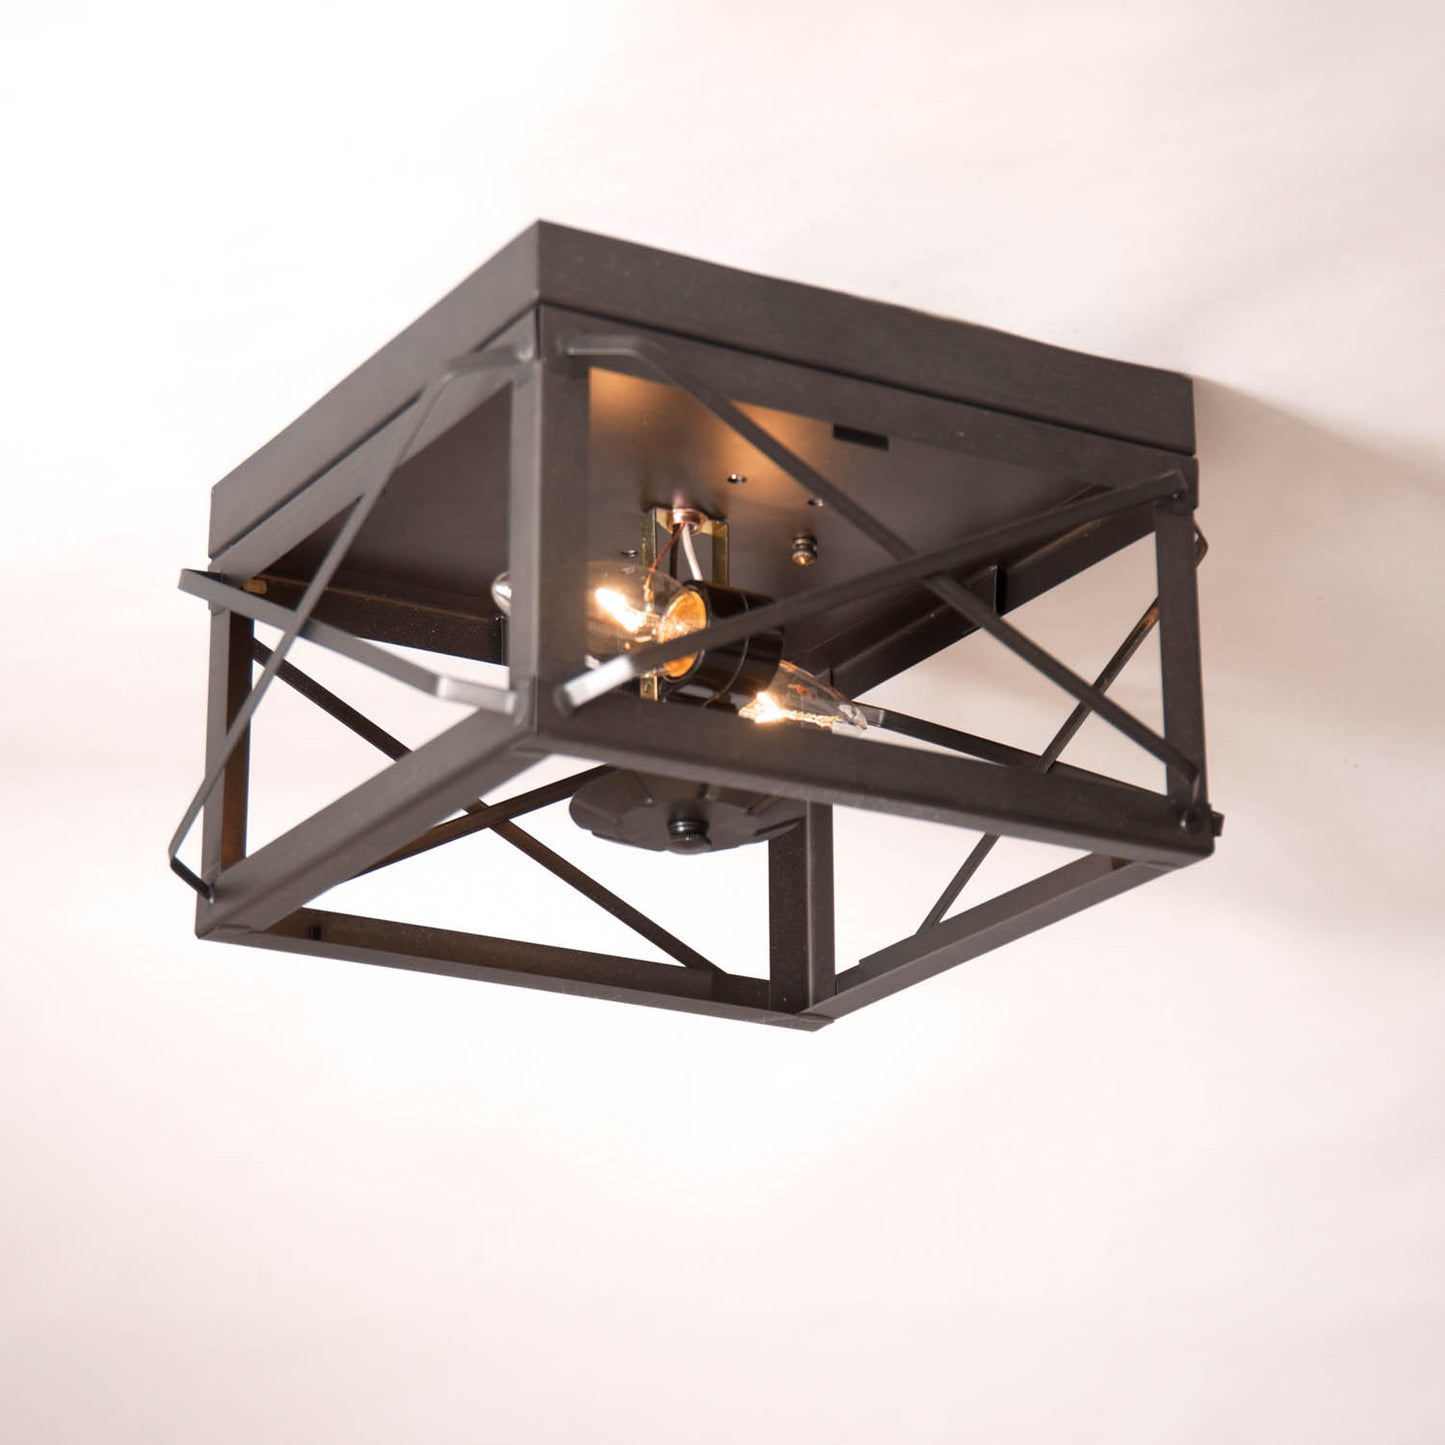 Double Ceiling Light with Folded Bars in Kettle Black